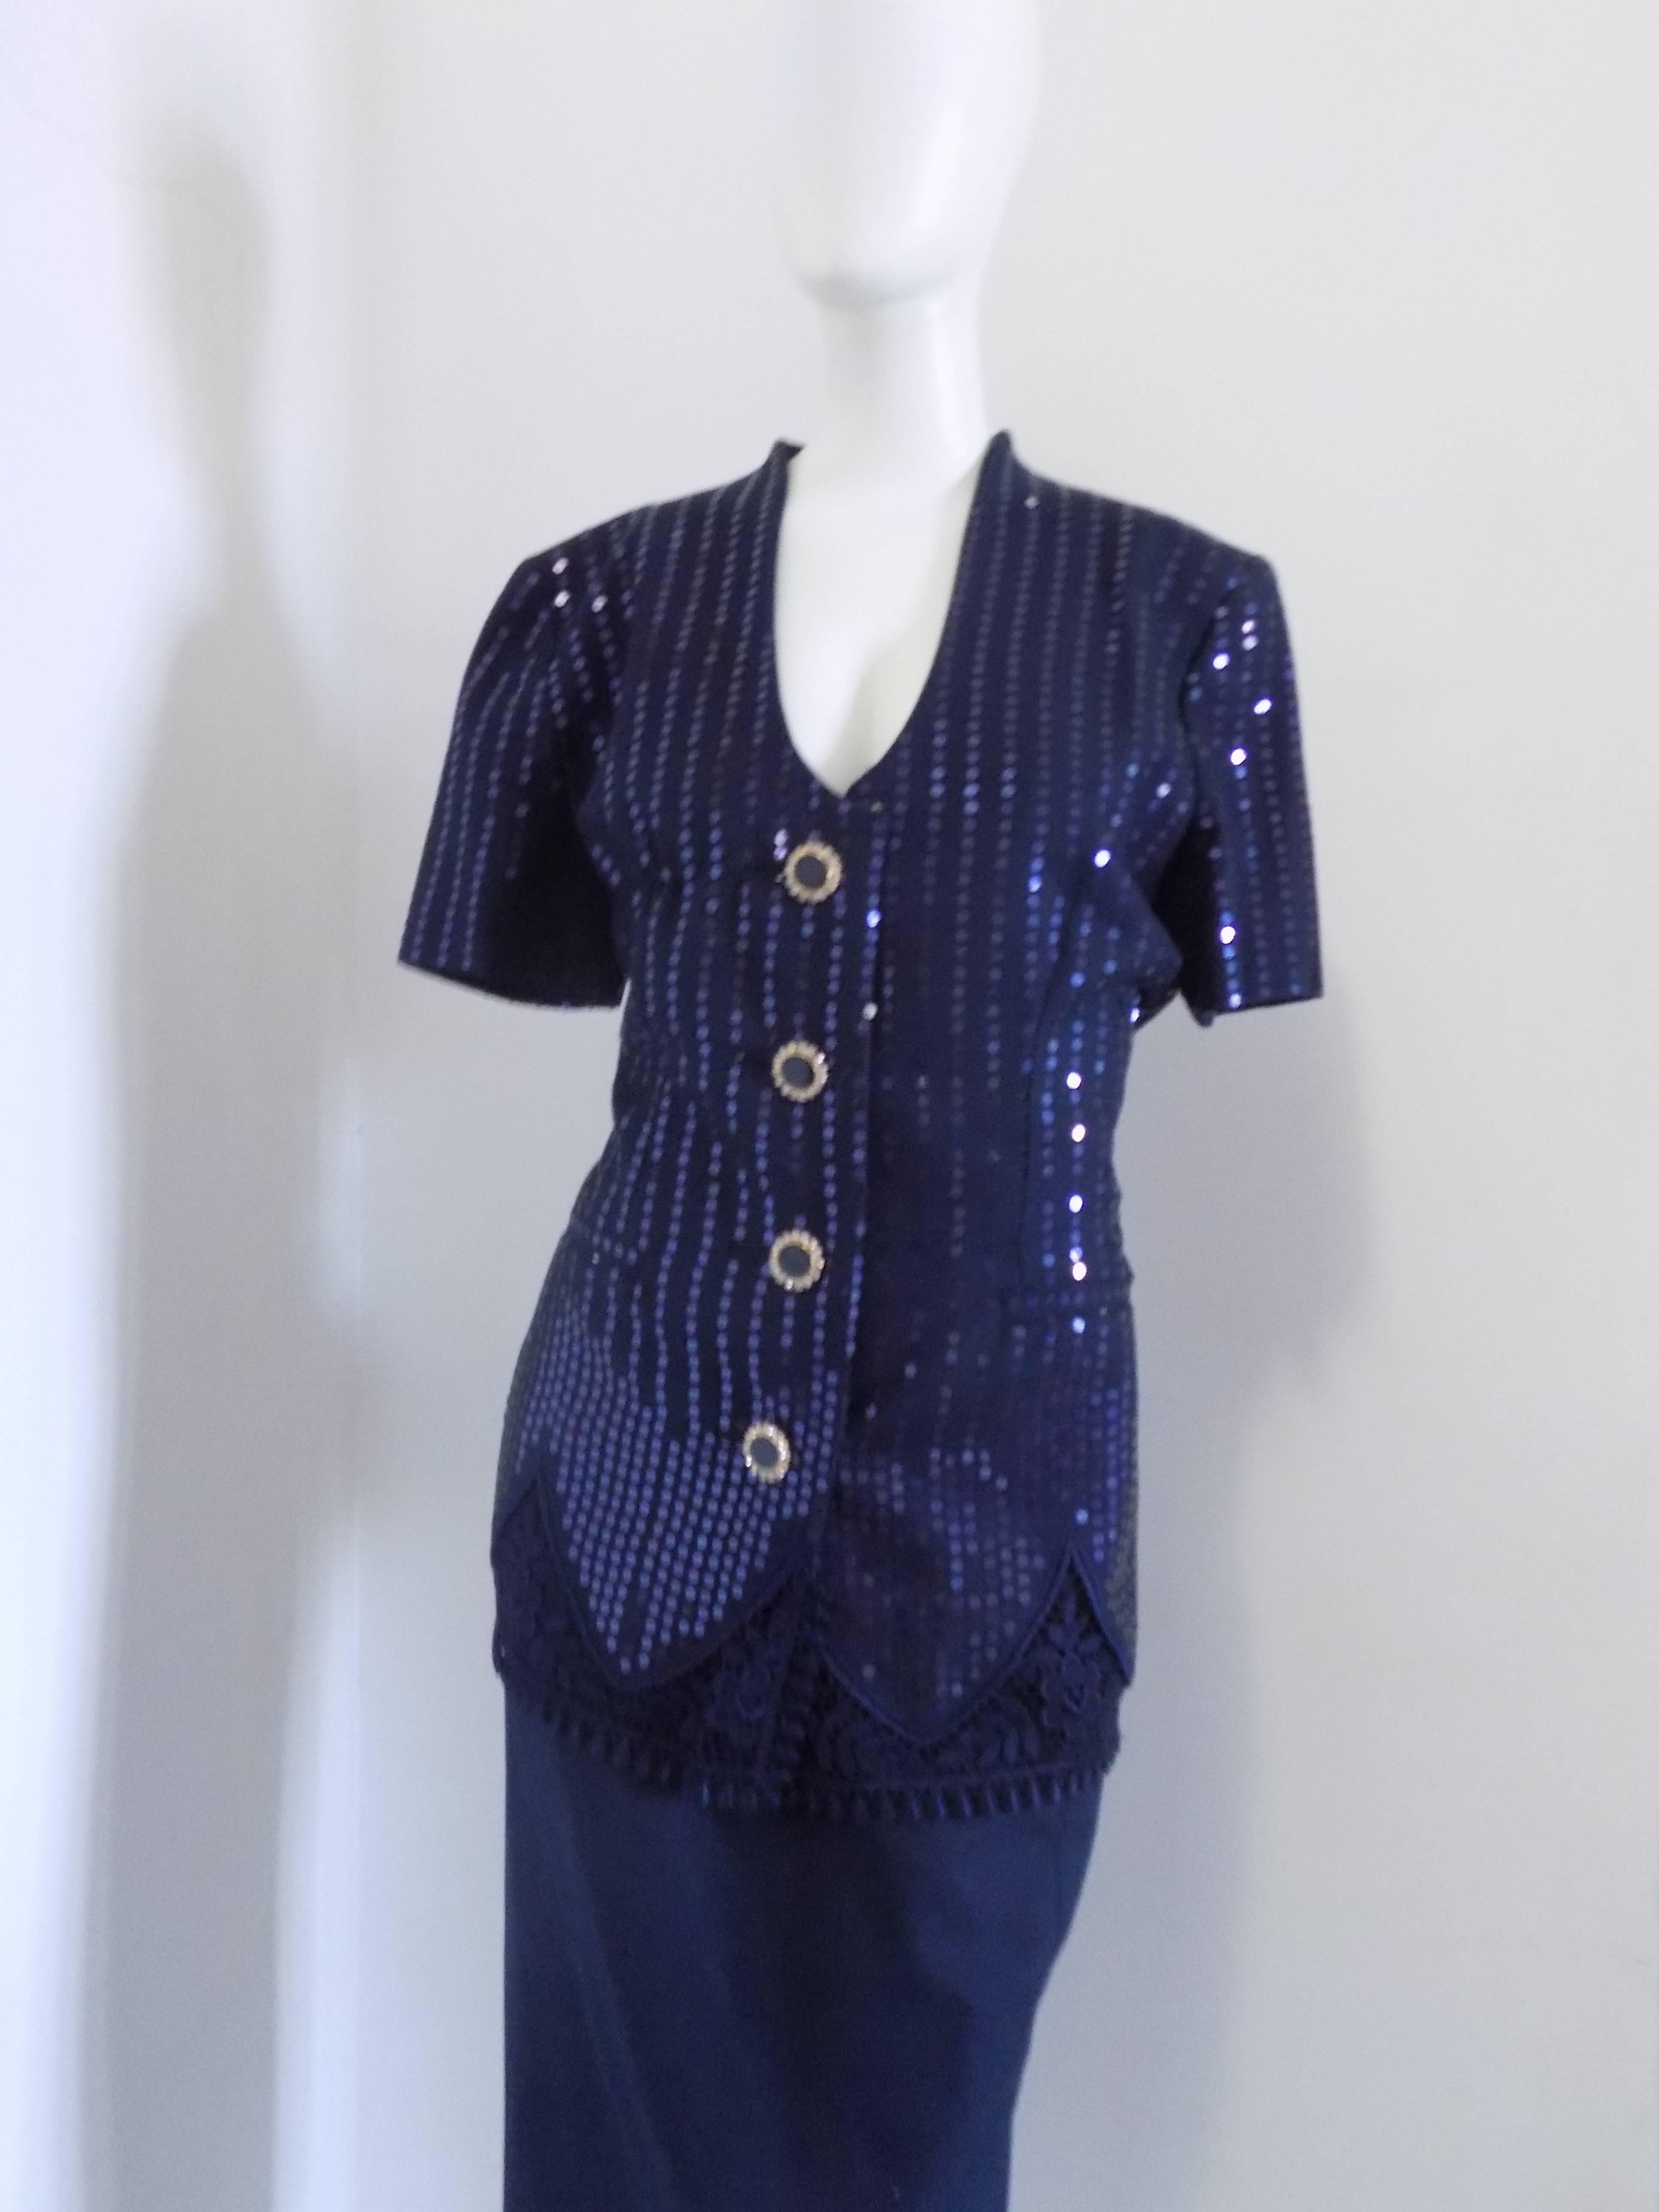 1990s Gai Mattiolo Couture Blu Sequins Suit  Tailleur

Embellished bottons

Totally made in italy in italian size range 44

Composition: 100% cotton

Jacket measurements: shoulder to hem 24 cm, lenght 75 cm 

Skirt: waist 74 cm, lenght 90